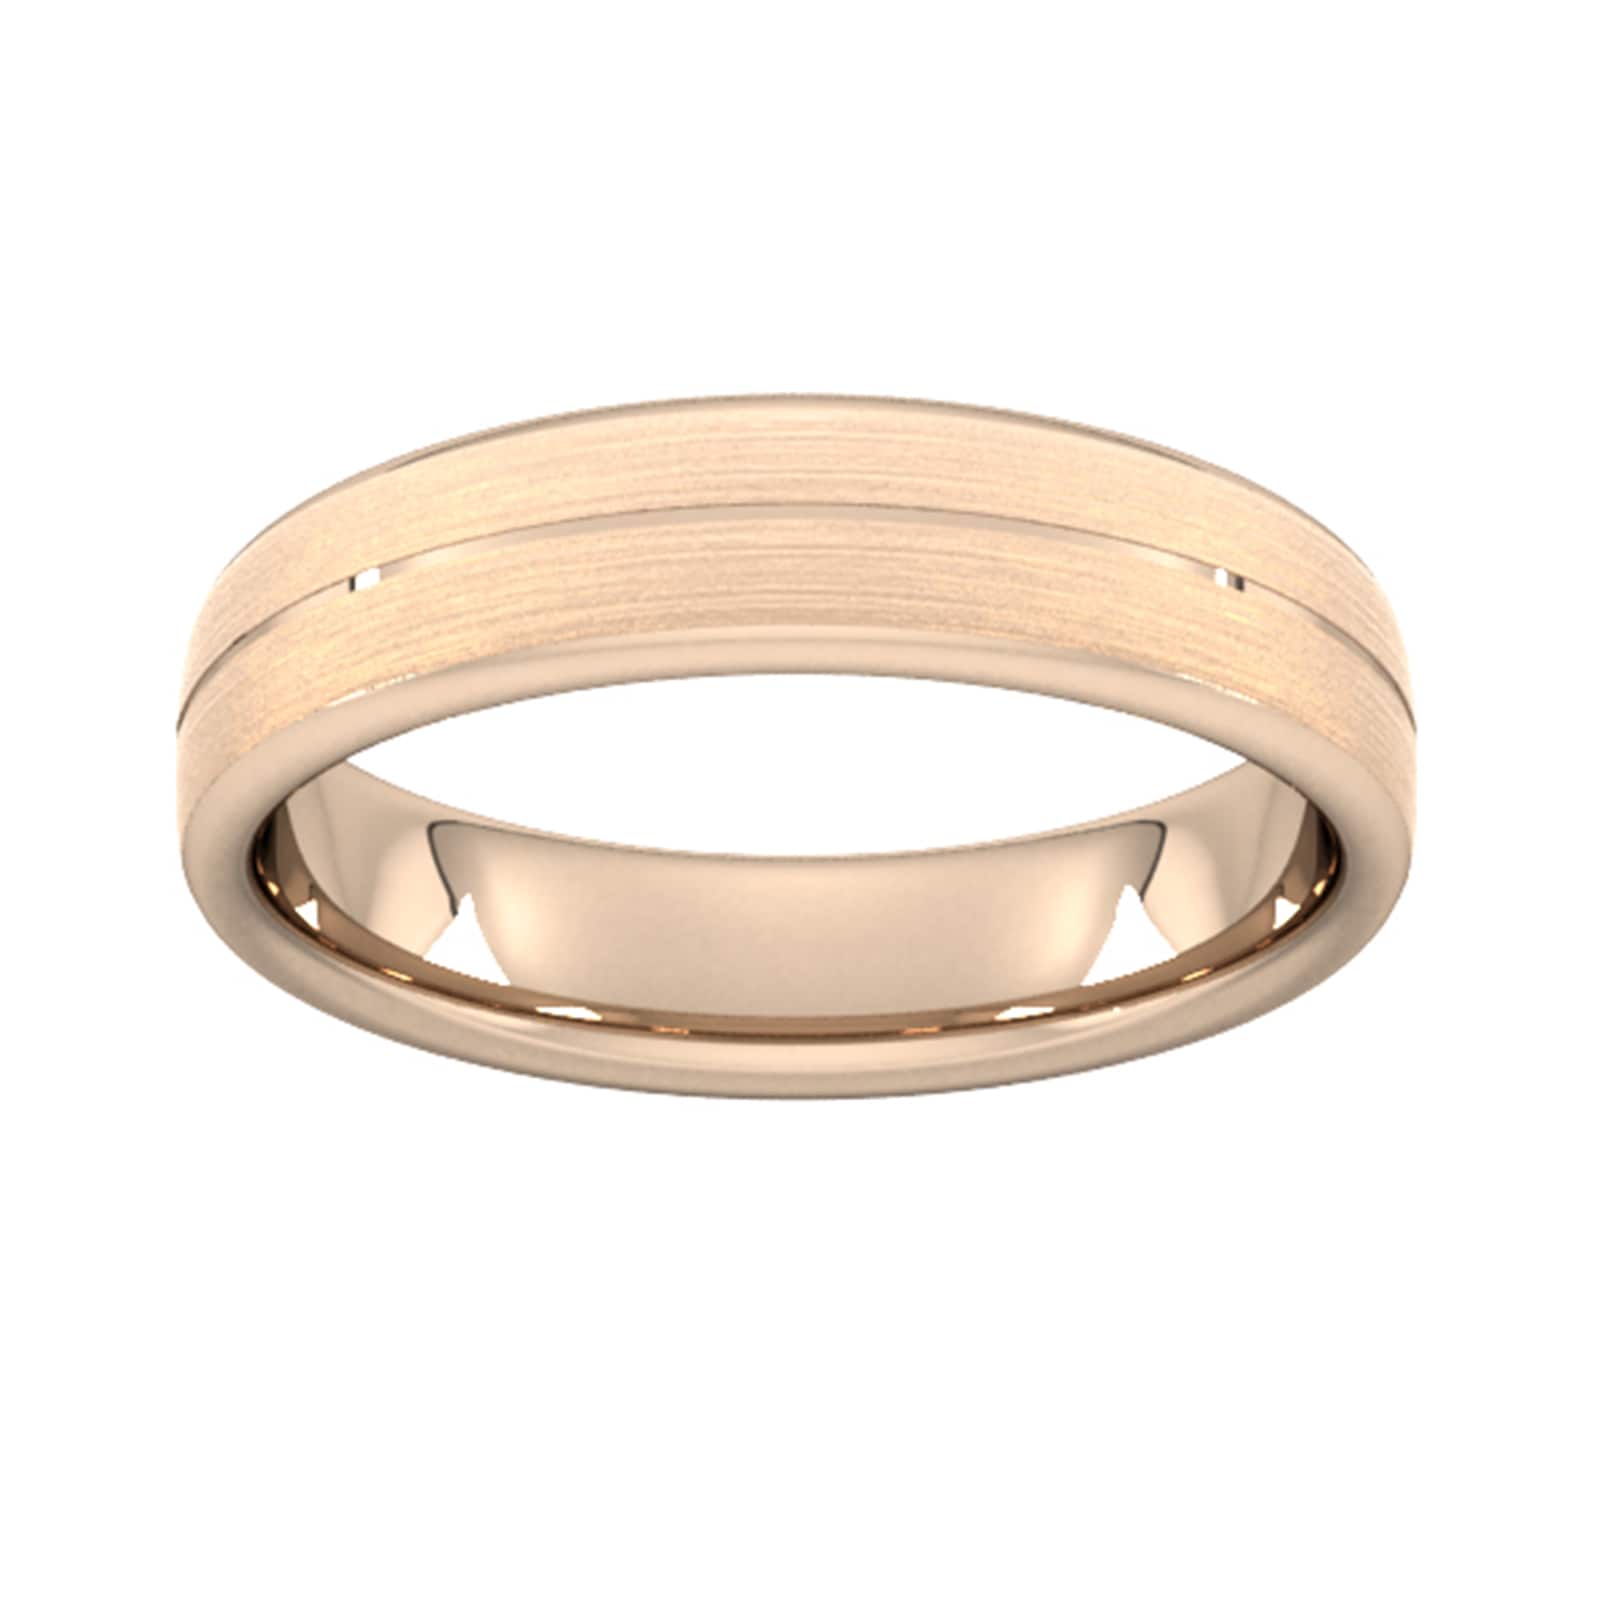 5mm Slight Court Standard Centre Groove With Chamfered Edge Wedding Ring In 18 Carat Rose Gold - Ring Size X